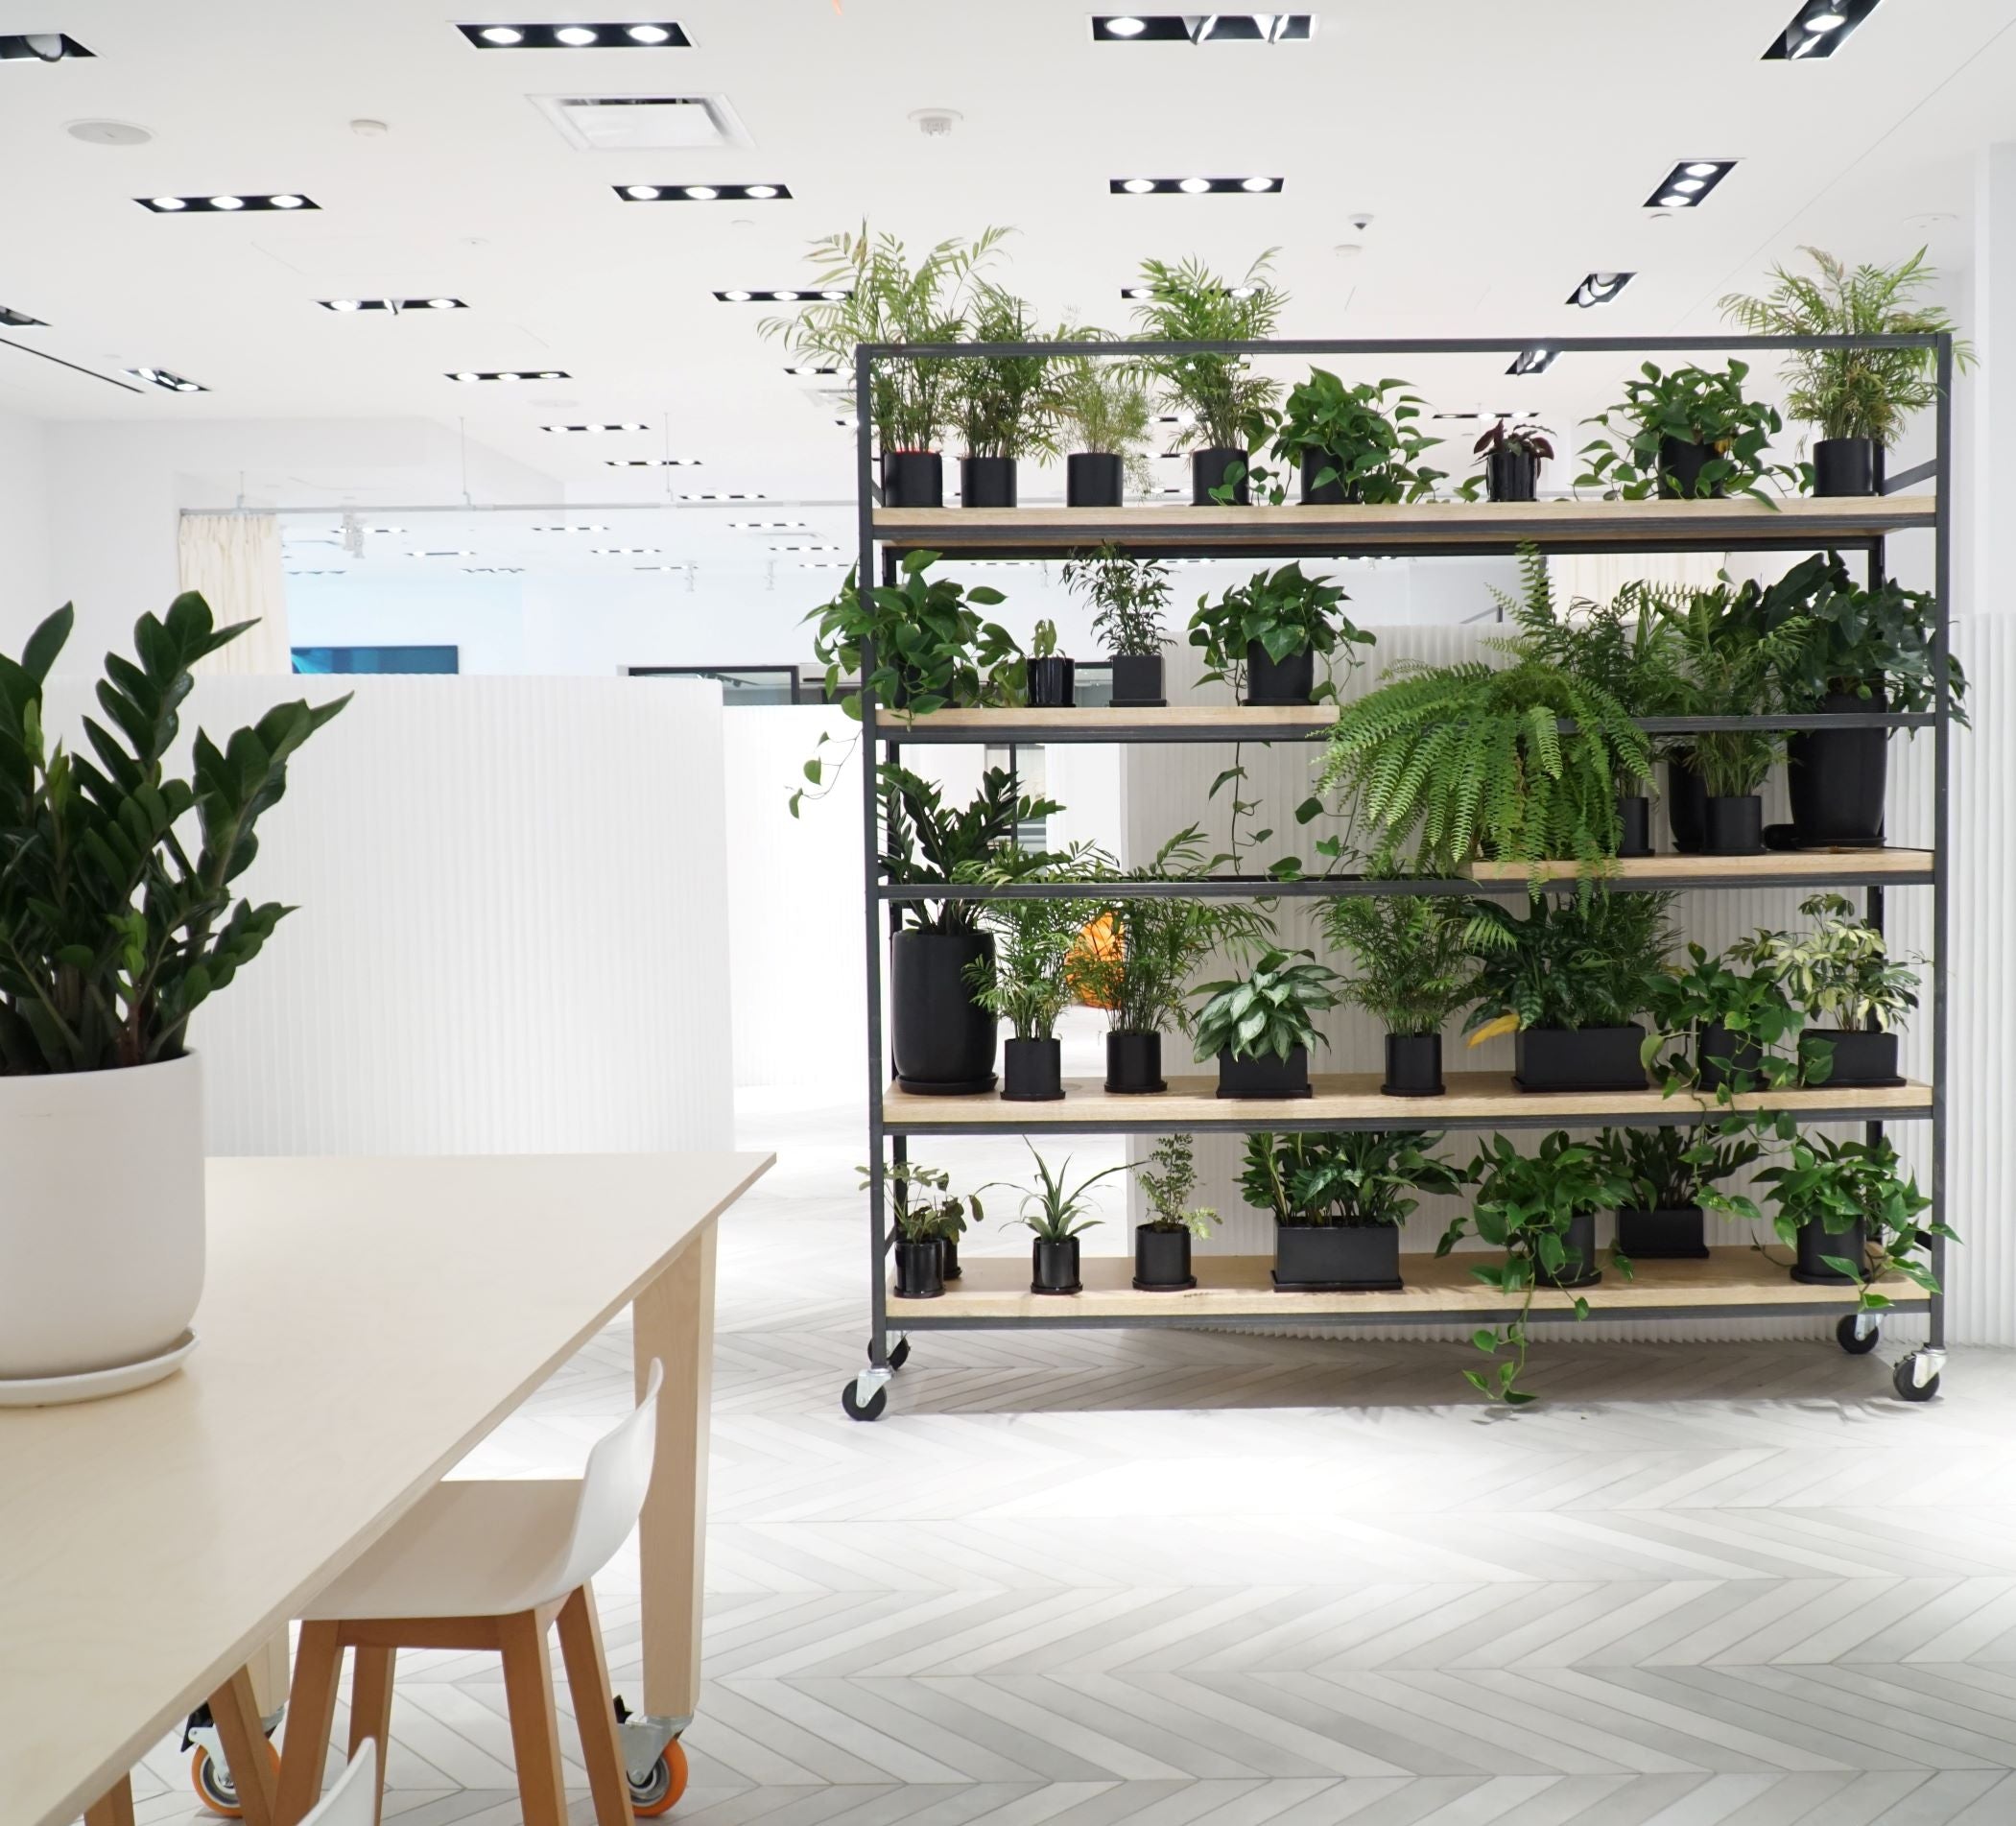 If You Want to Increase Productivity, Bring Indoor Plants into the Office